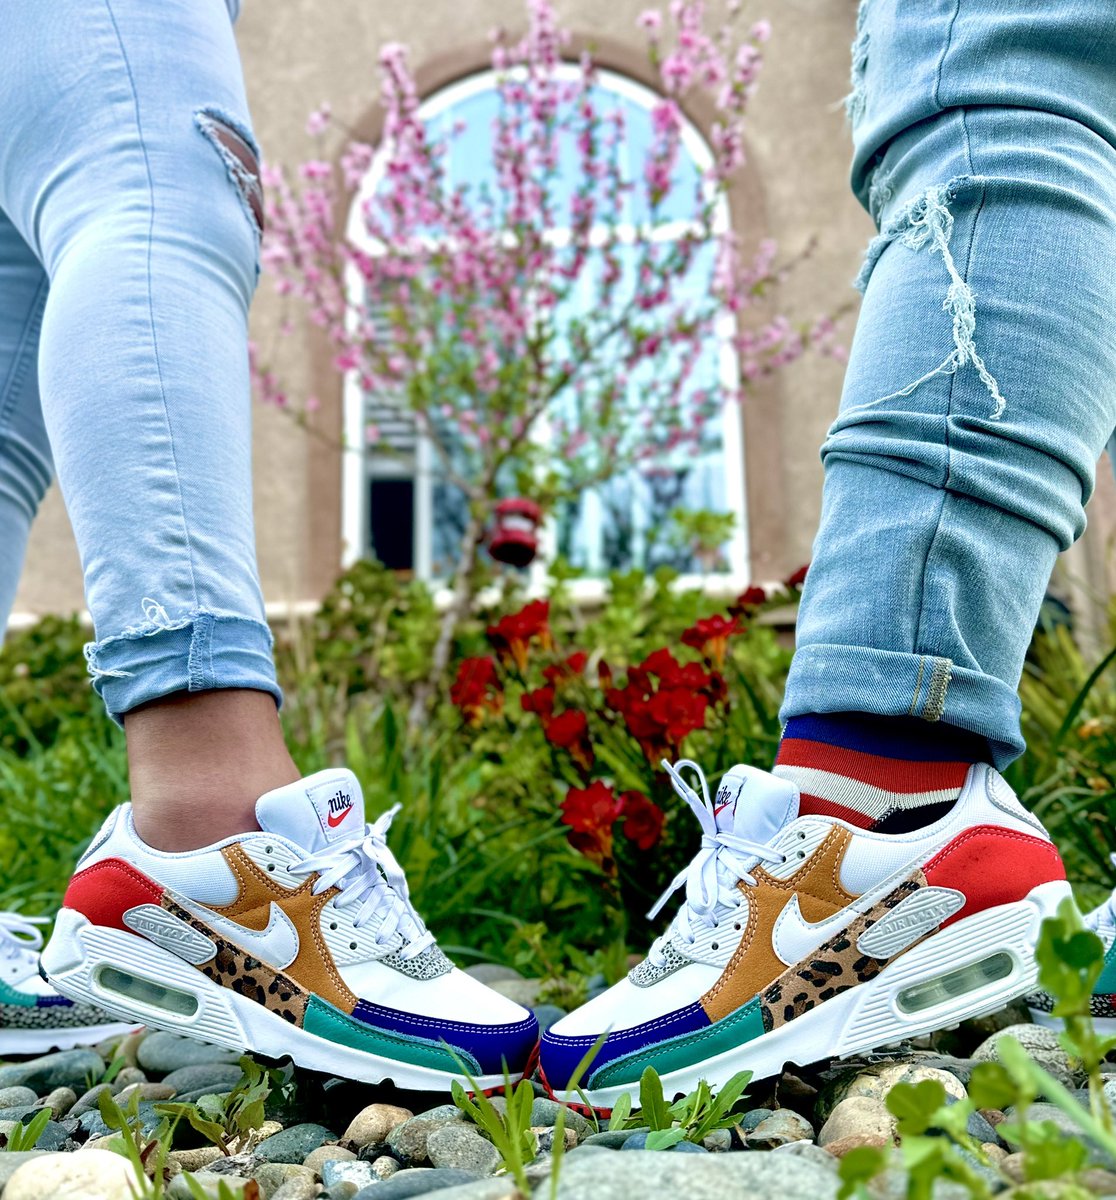 Day 20 Kissing shoes in Spring Flowers for #marchMAXness and #airmaxmonth2024 with my twin #womensneakerheadwednesday
#WomenSneakerWednesday #mywifebetterthanyours #thesolefirm #stilllaceddifferently #snkrsliveheatingup 
#solecollectors #snkrskickcheck #AirMaxMonth